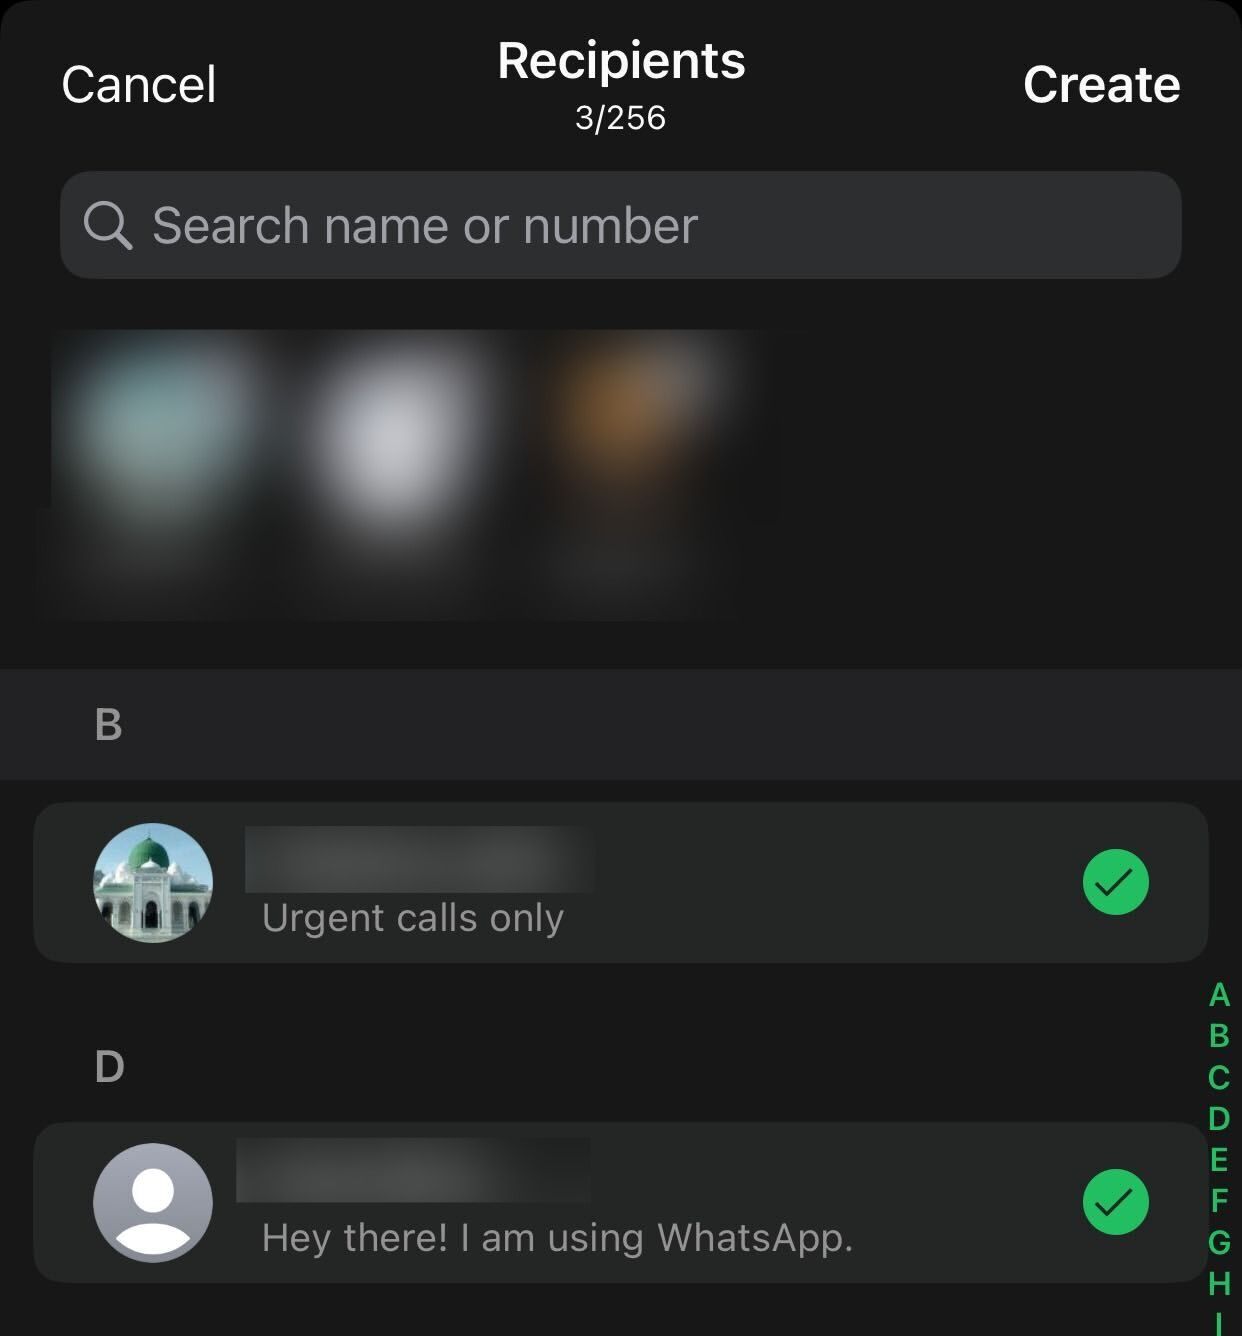 Creating a new broadcast list in WhatsApp